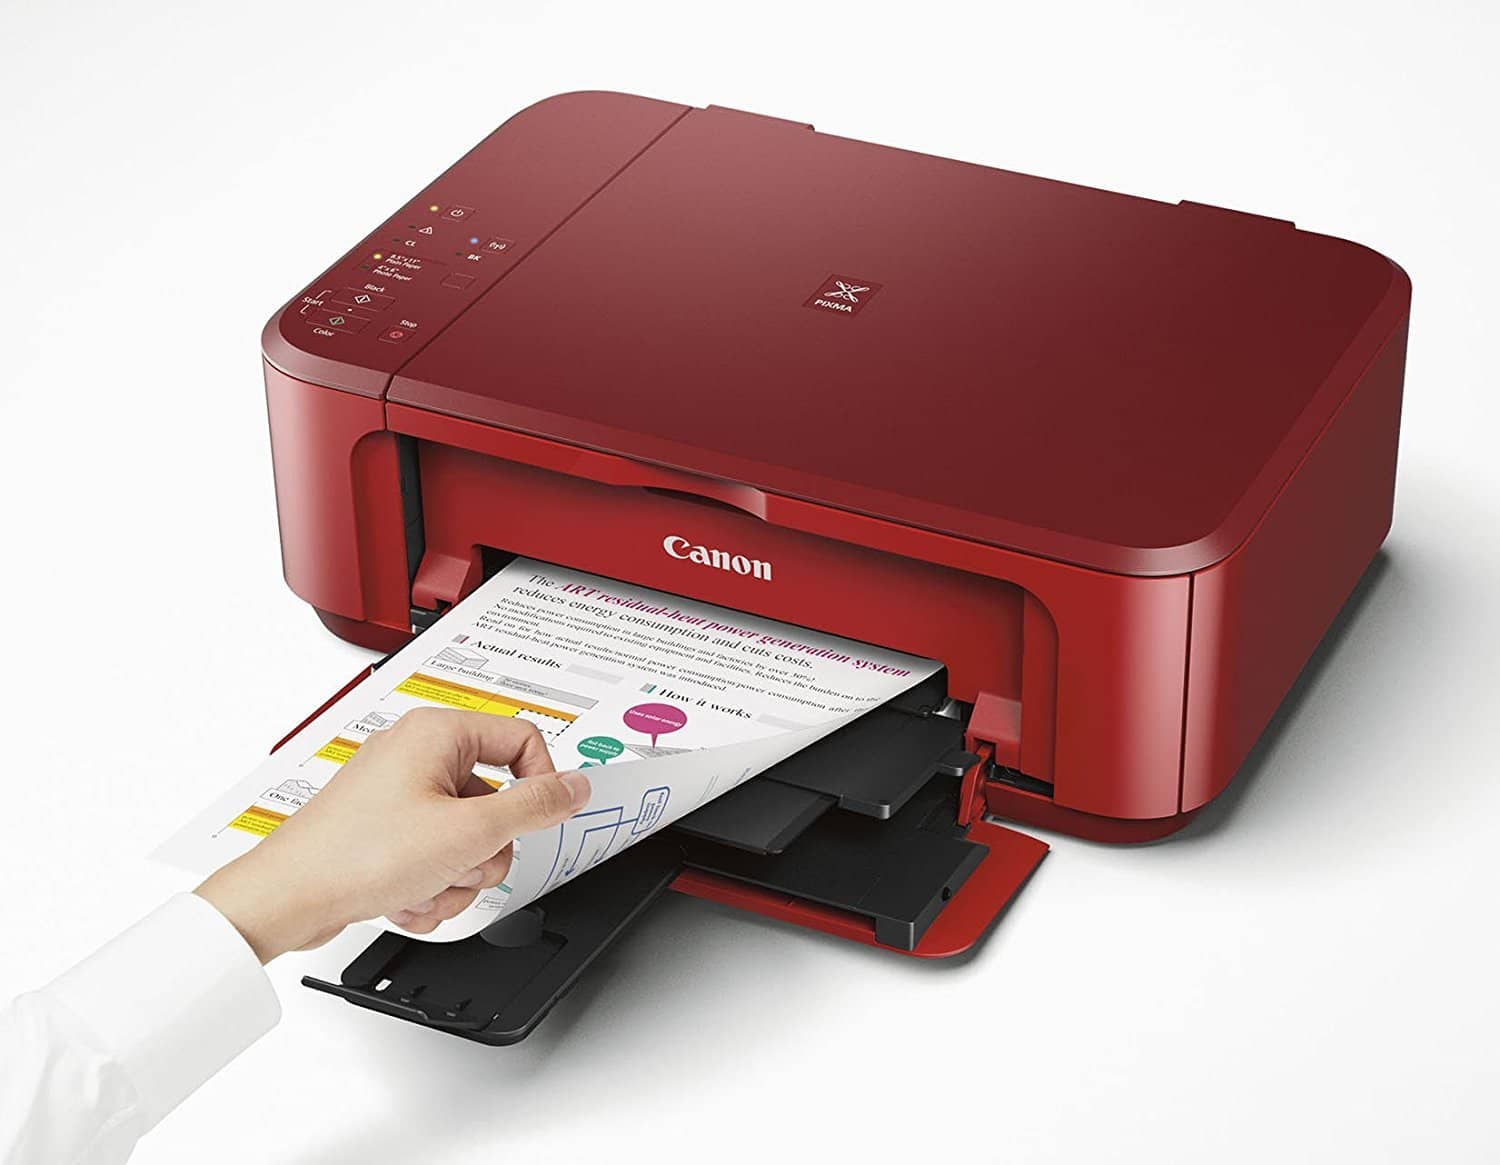 Canon PIXMA MG3620 Wireless All-In-One Color Inkjet Printer - Red